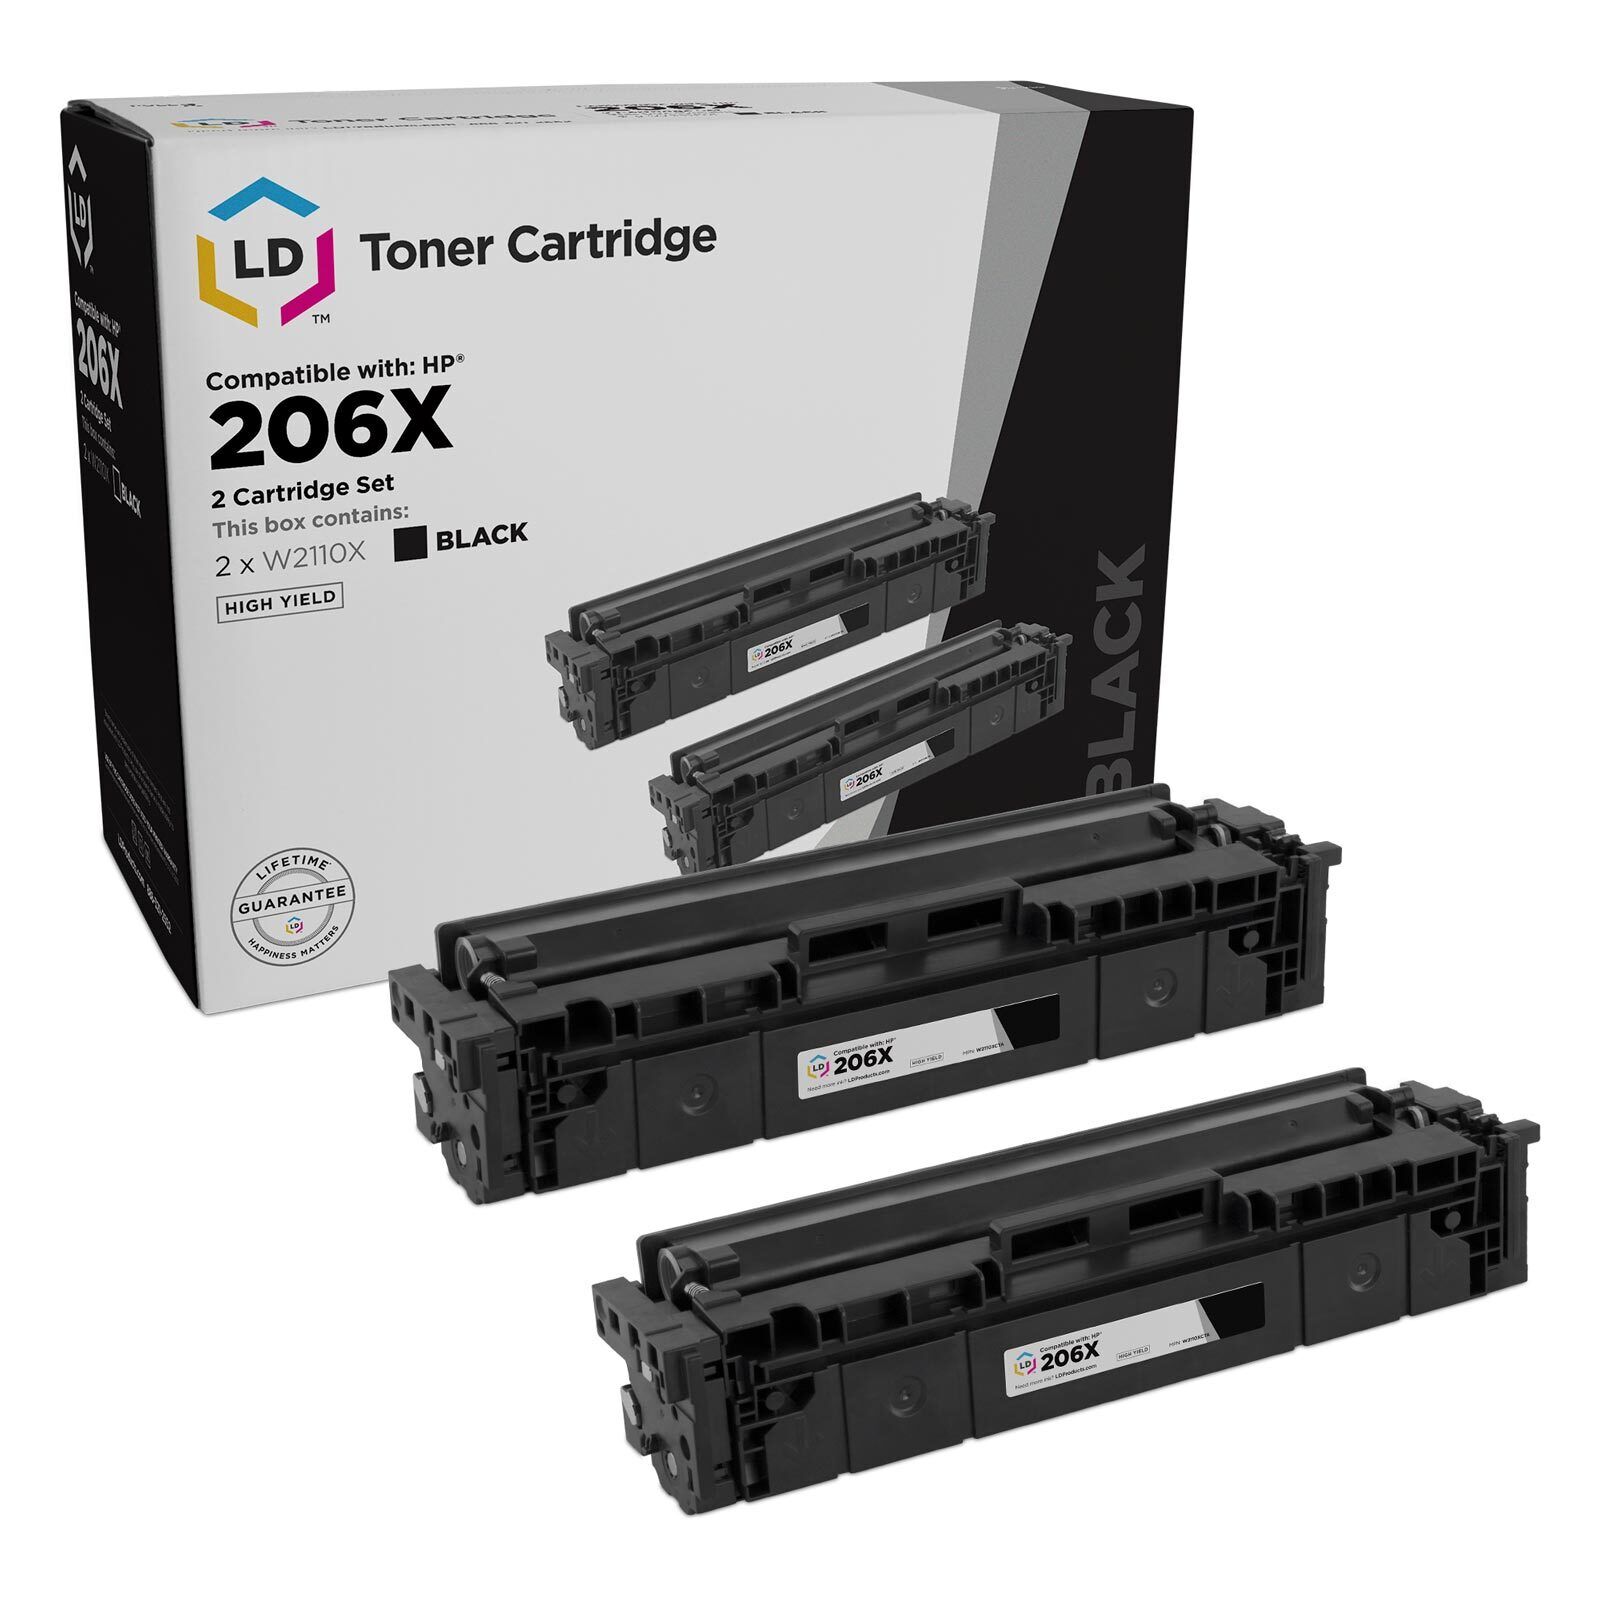 LD 2PK Replacement for HP 206X W2110X HY Black Toner for M255dw M283cdw M283fdw